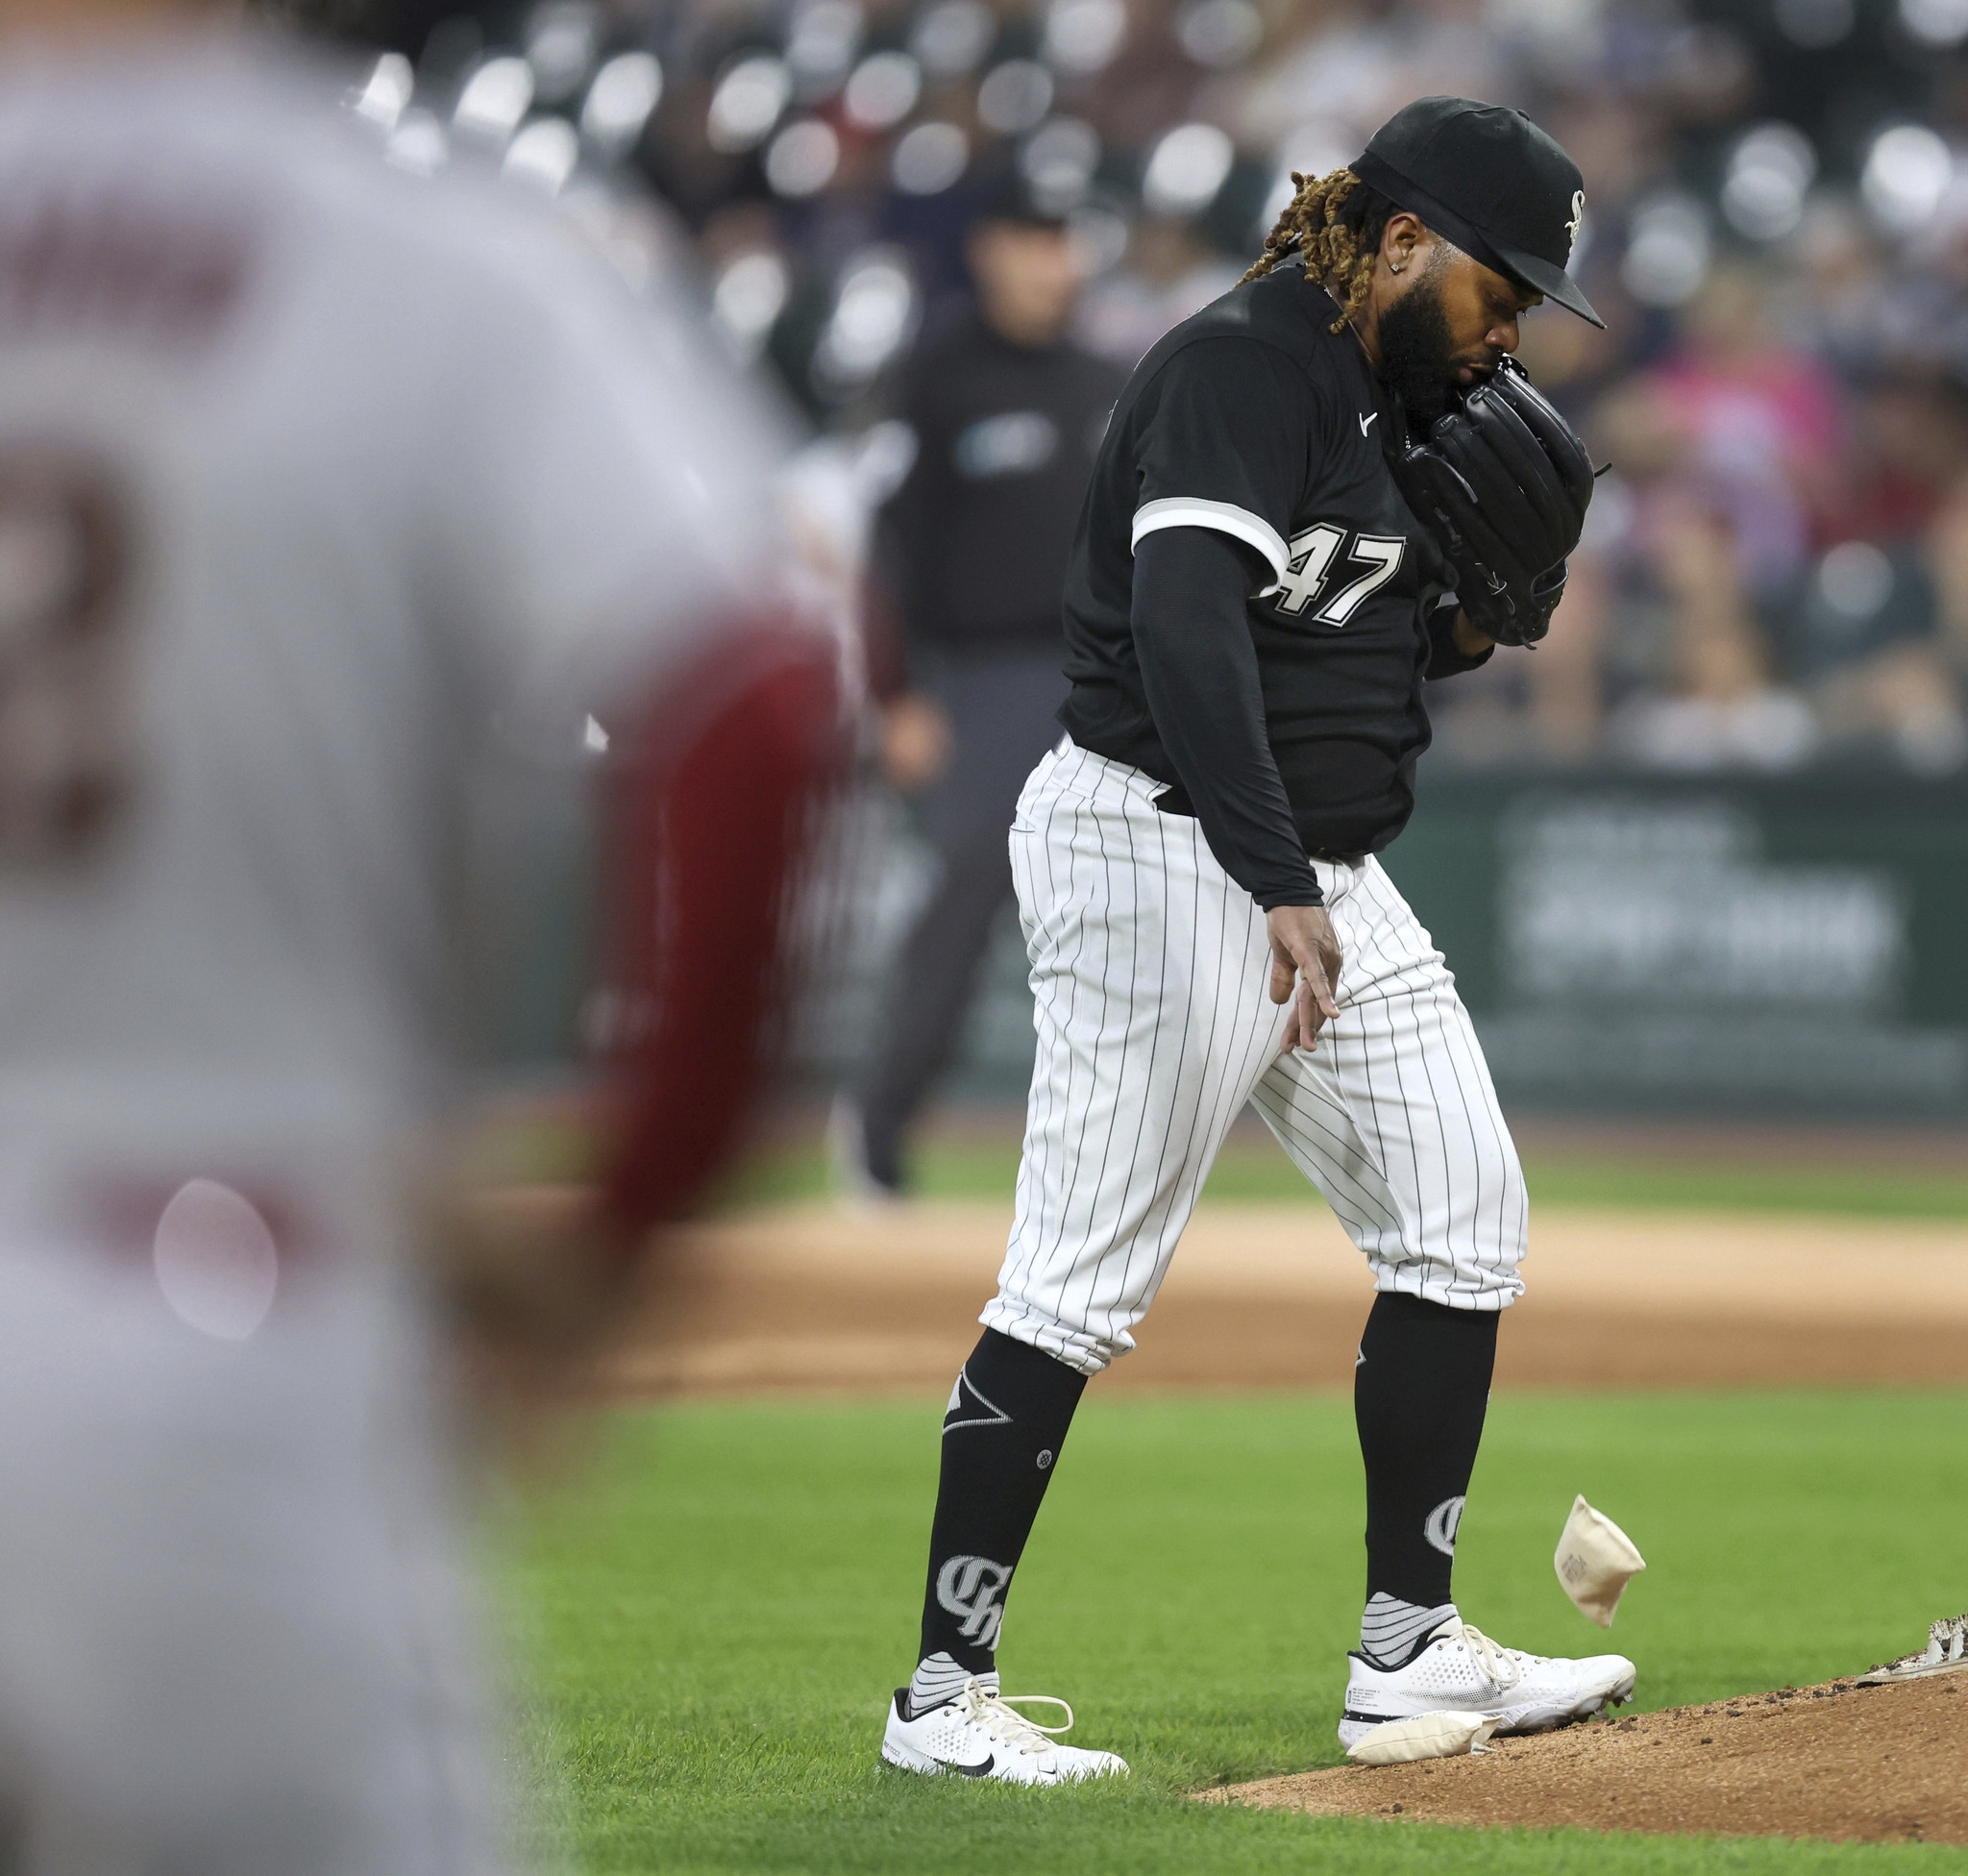 Johnny Cueto gives another 8 strong innings, but White Sox fall in  road-trip opener - Chicago Sun-Times